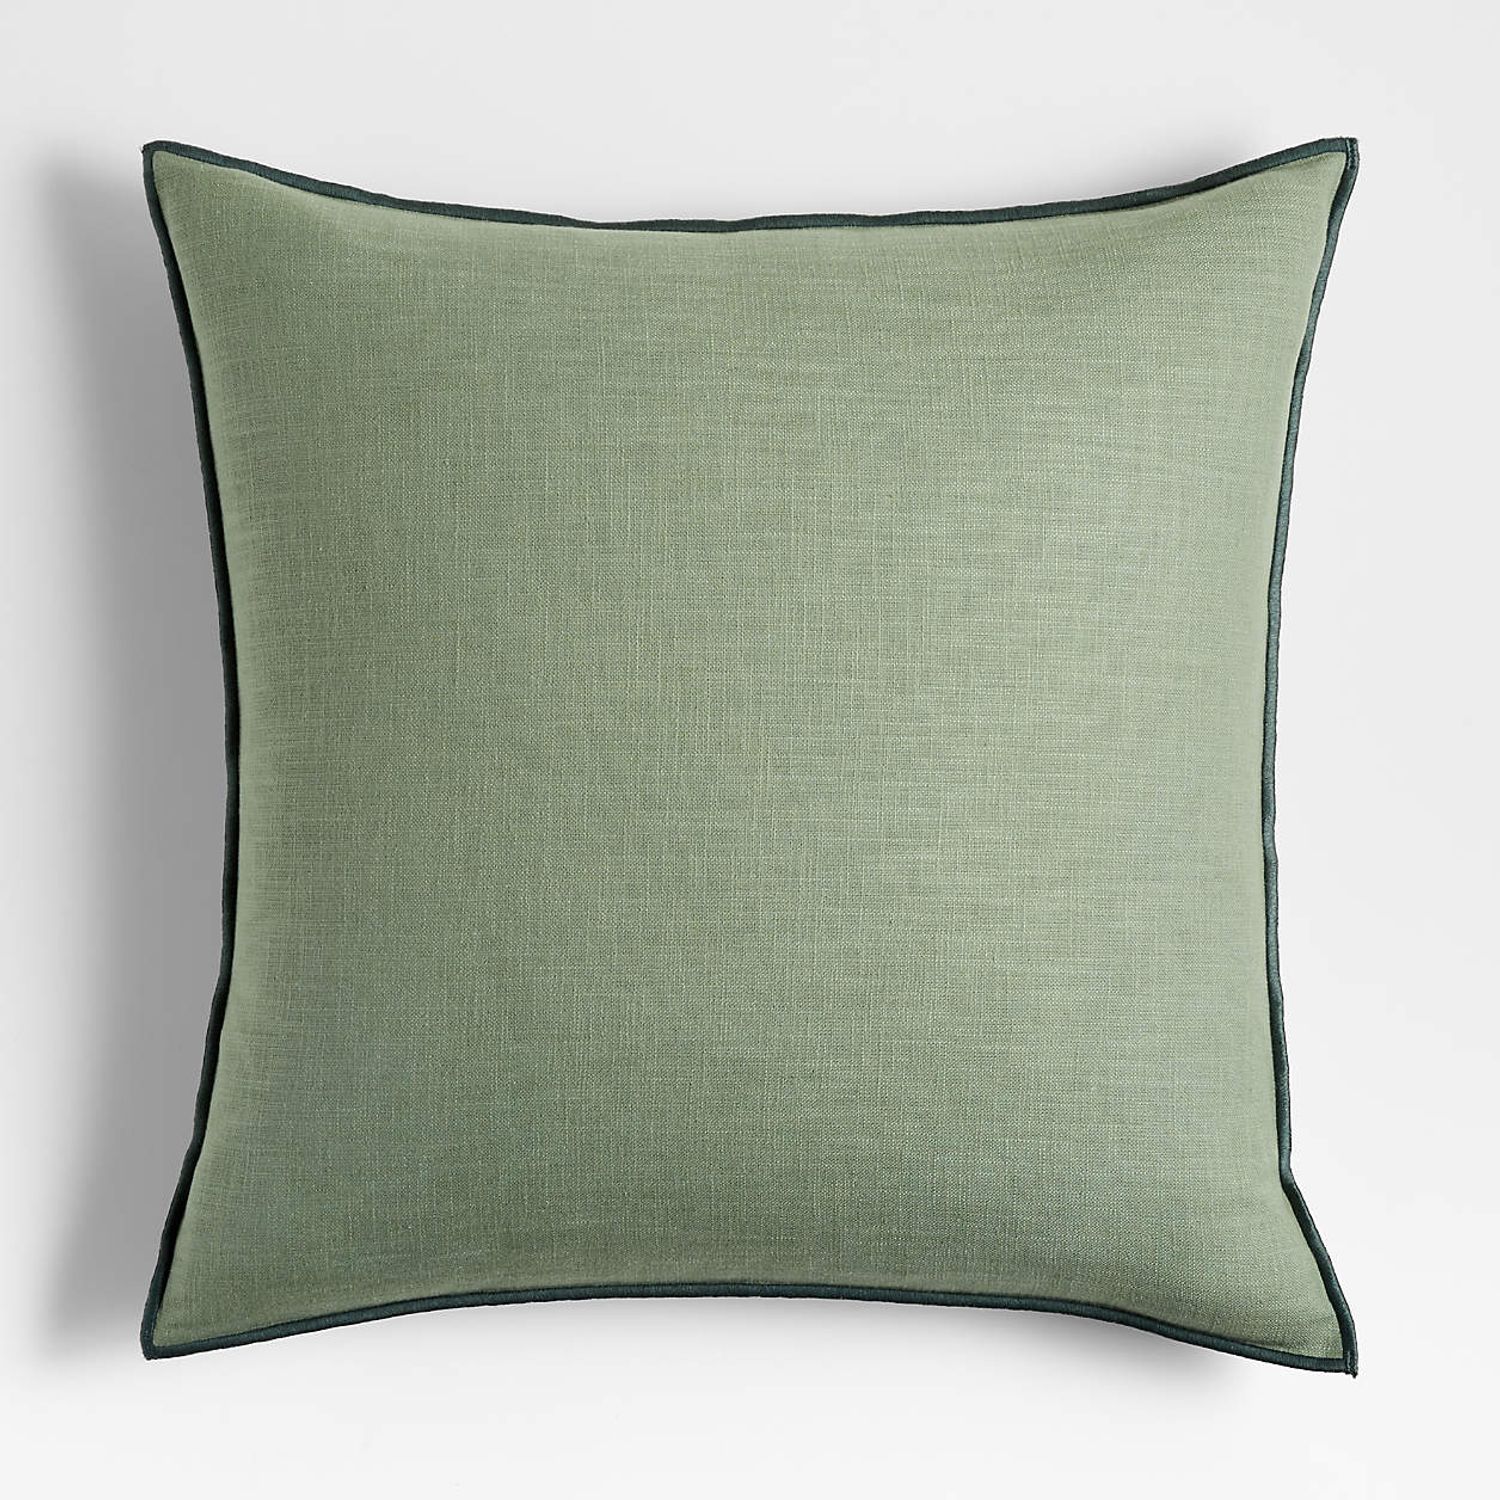 Shop Sage 23" Merrow Stitch Cotton Pillow Cover w/ Inserts (2) from Crate and Barrel on Openhaus